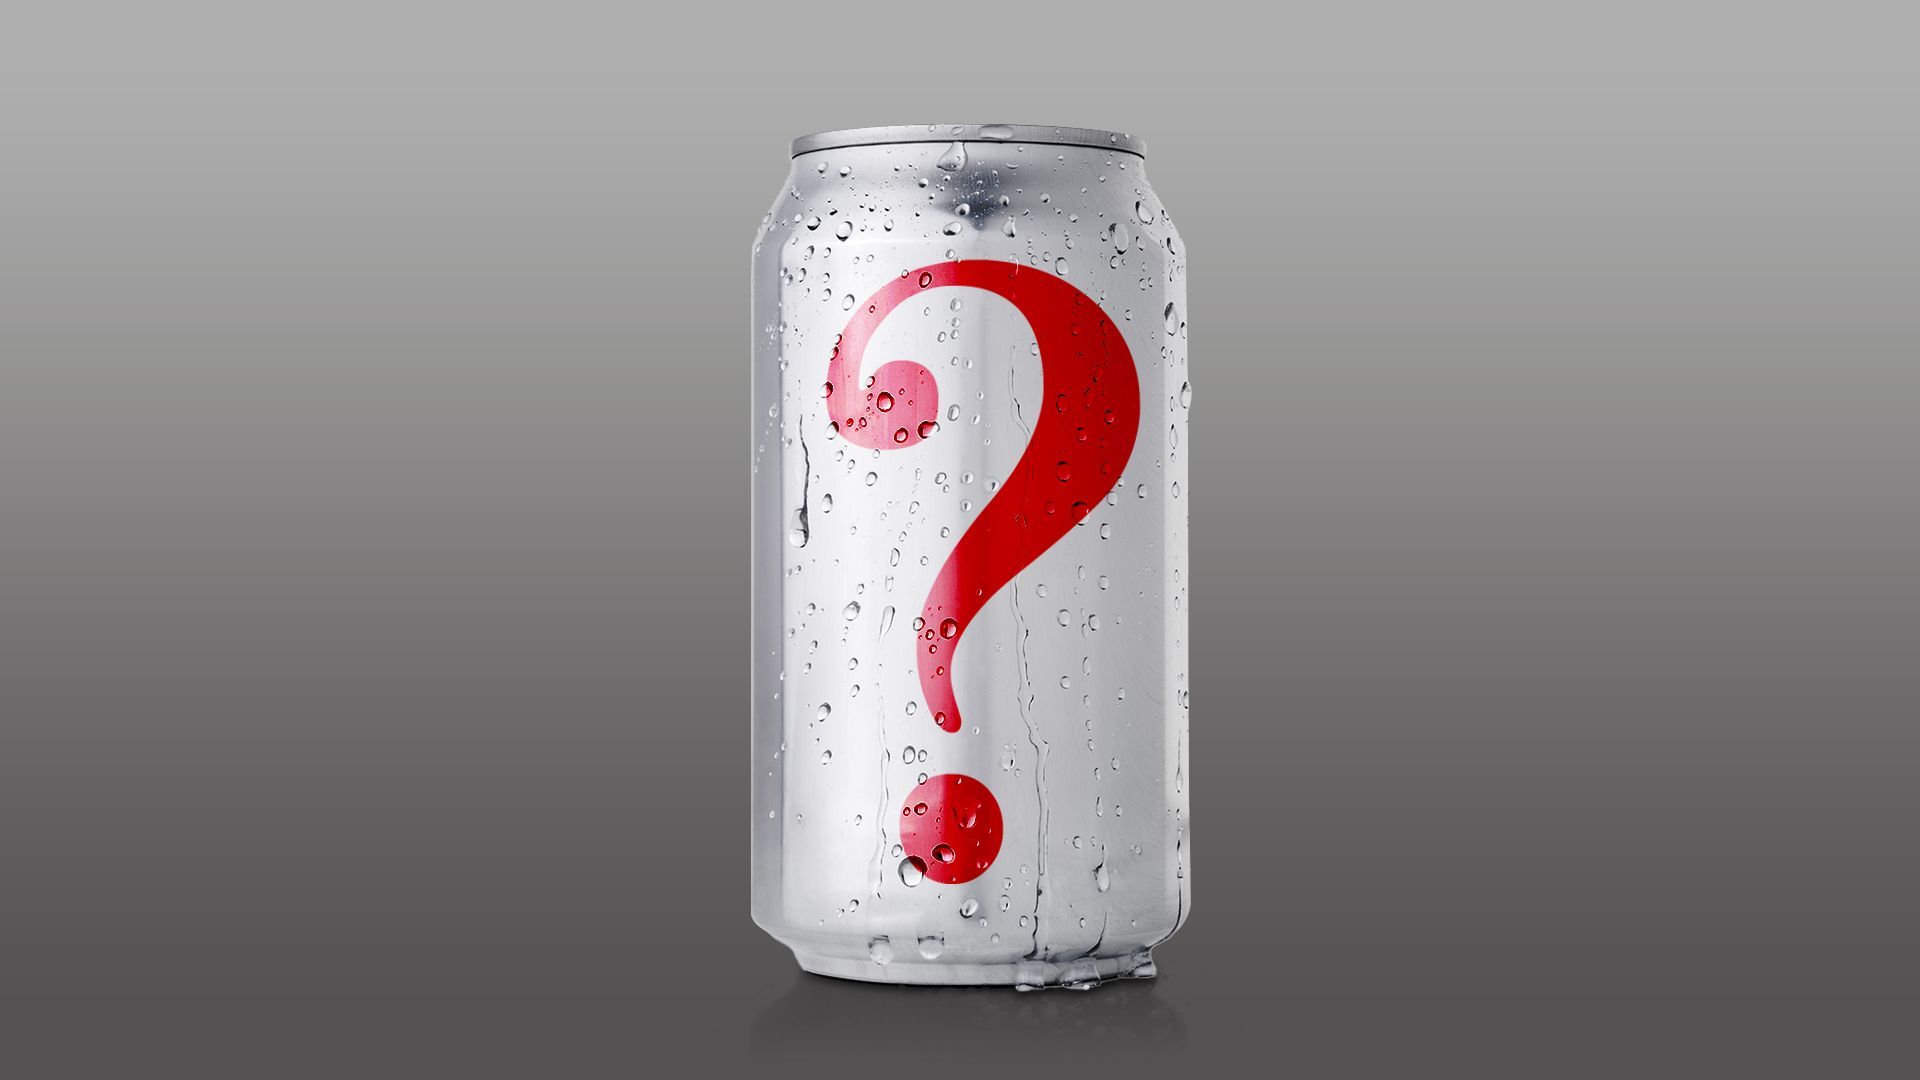 Illustration of an aluminum can with a large question mark on it